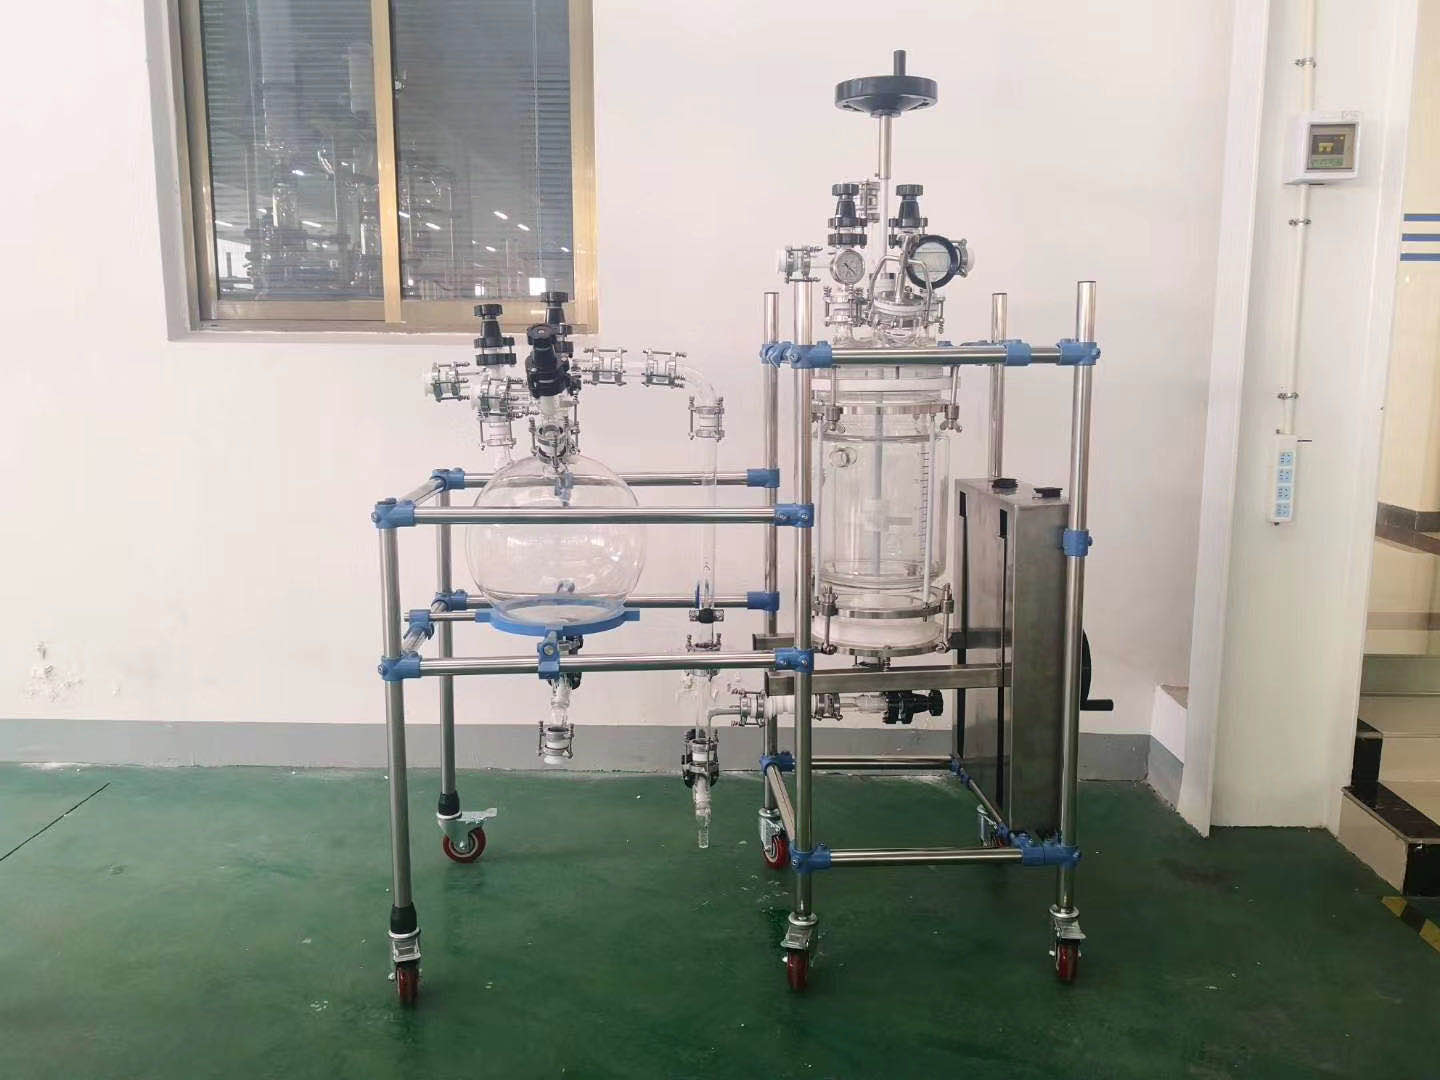 Introduce Filter reactor and nutsch reactor you.